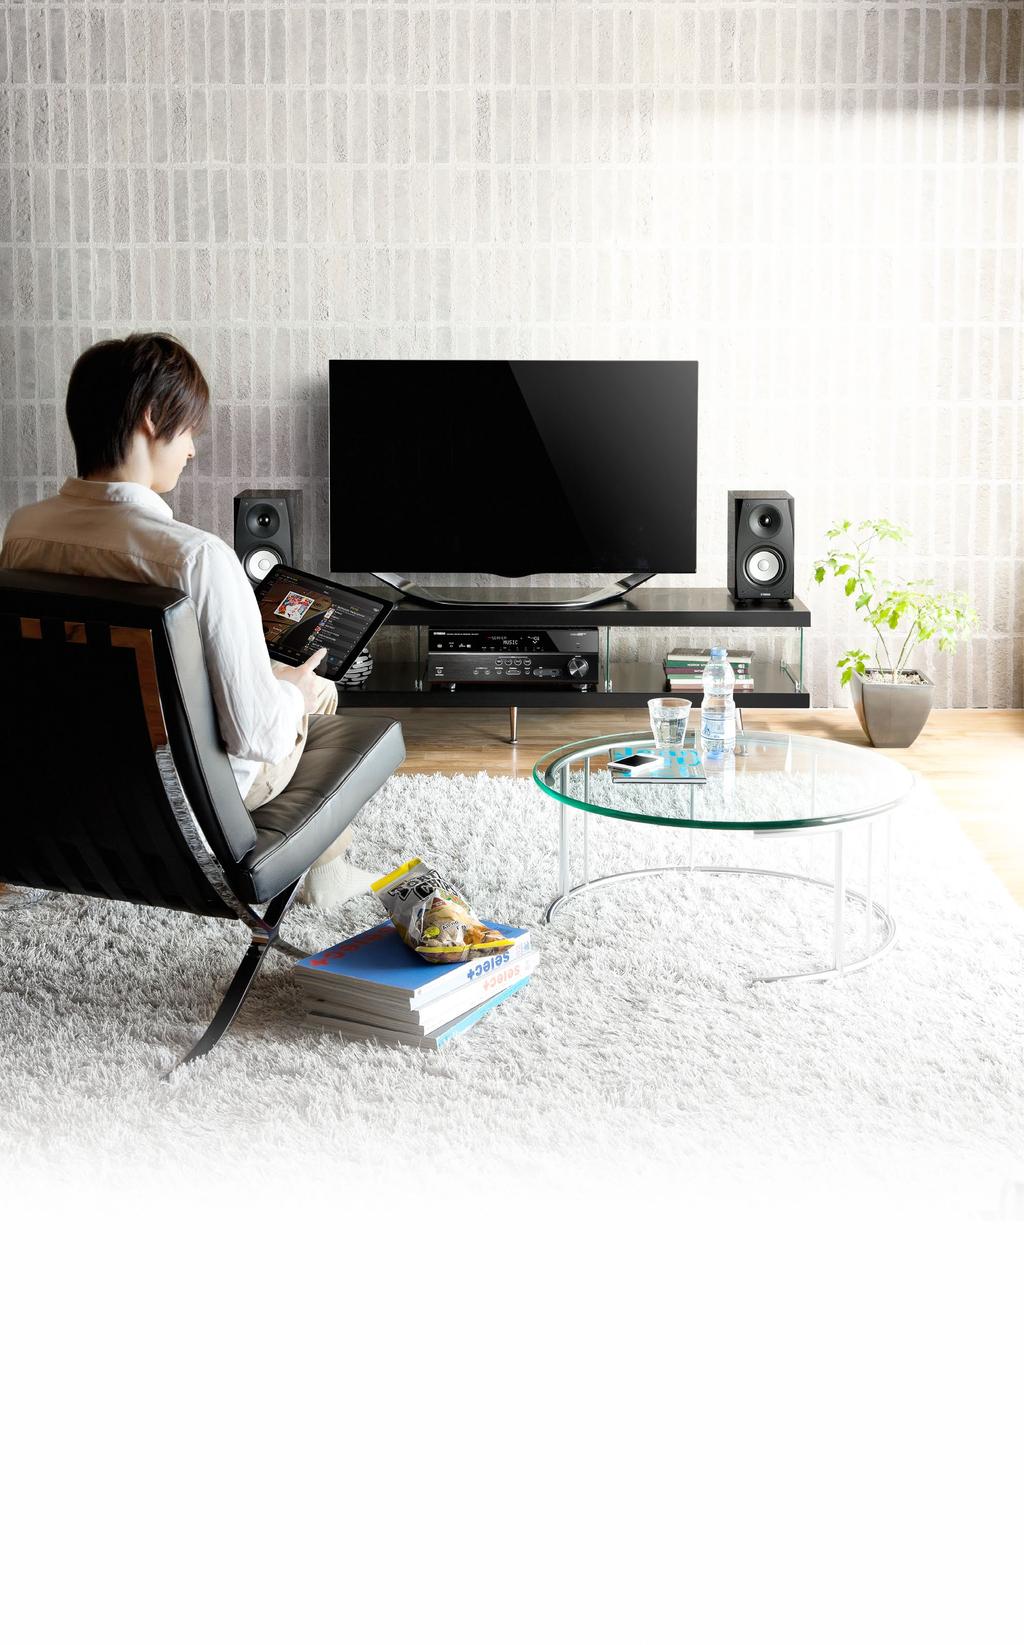 In addition, this model also features a Virtual Surround Back Speaker function.